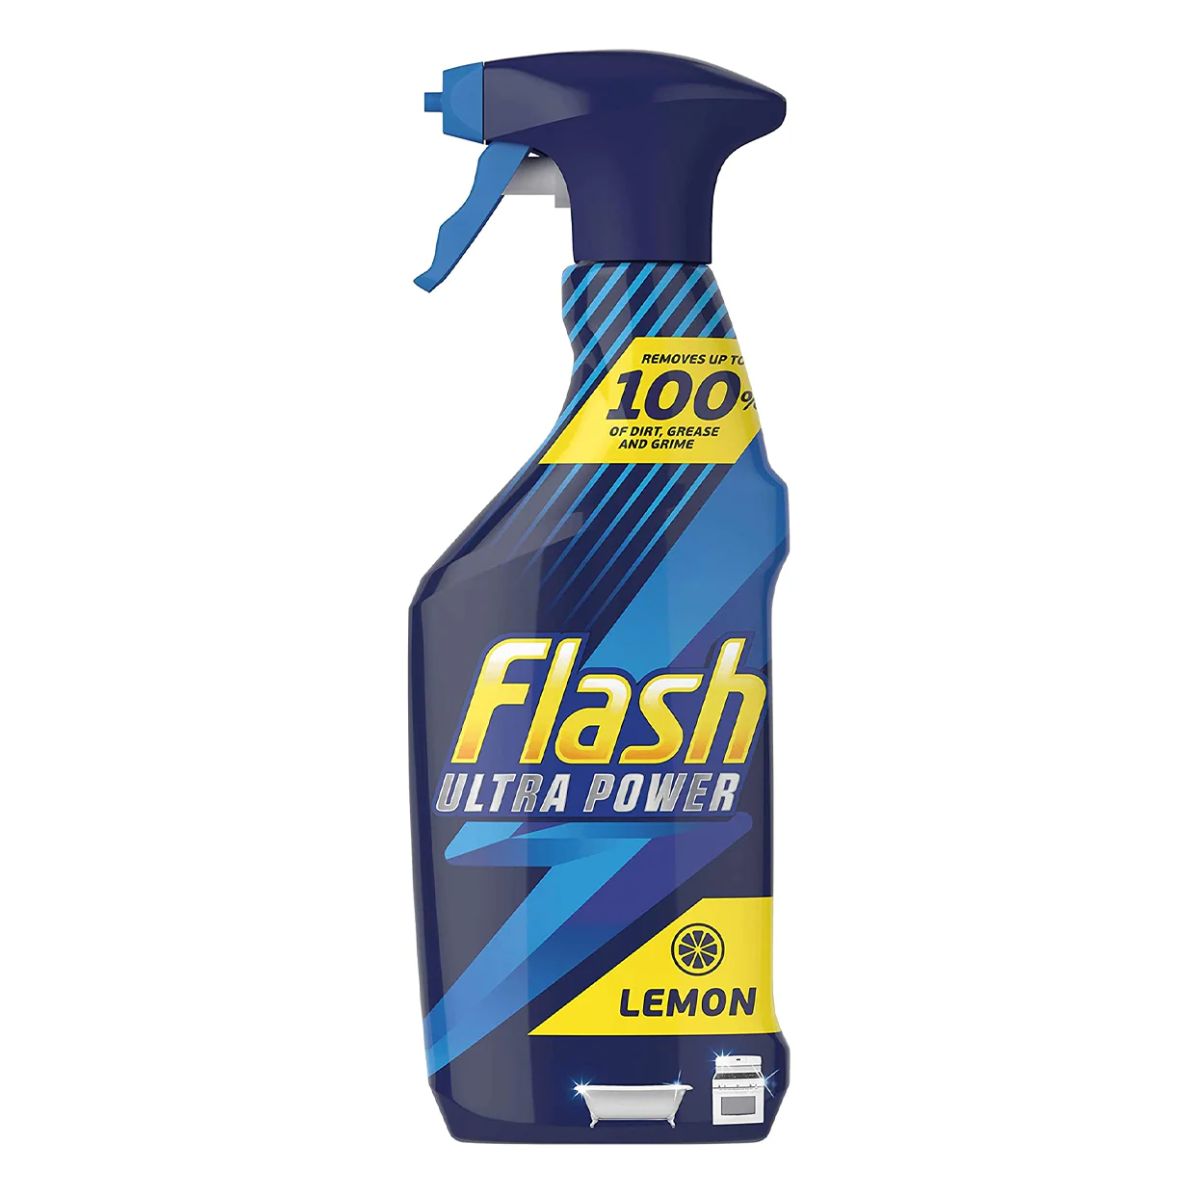 A bottle of Flash - Ultra Power Cleaner Spray with Lemon Scent - 500ml.